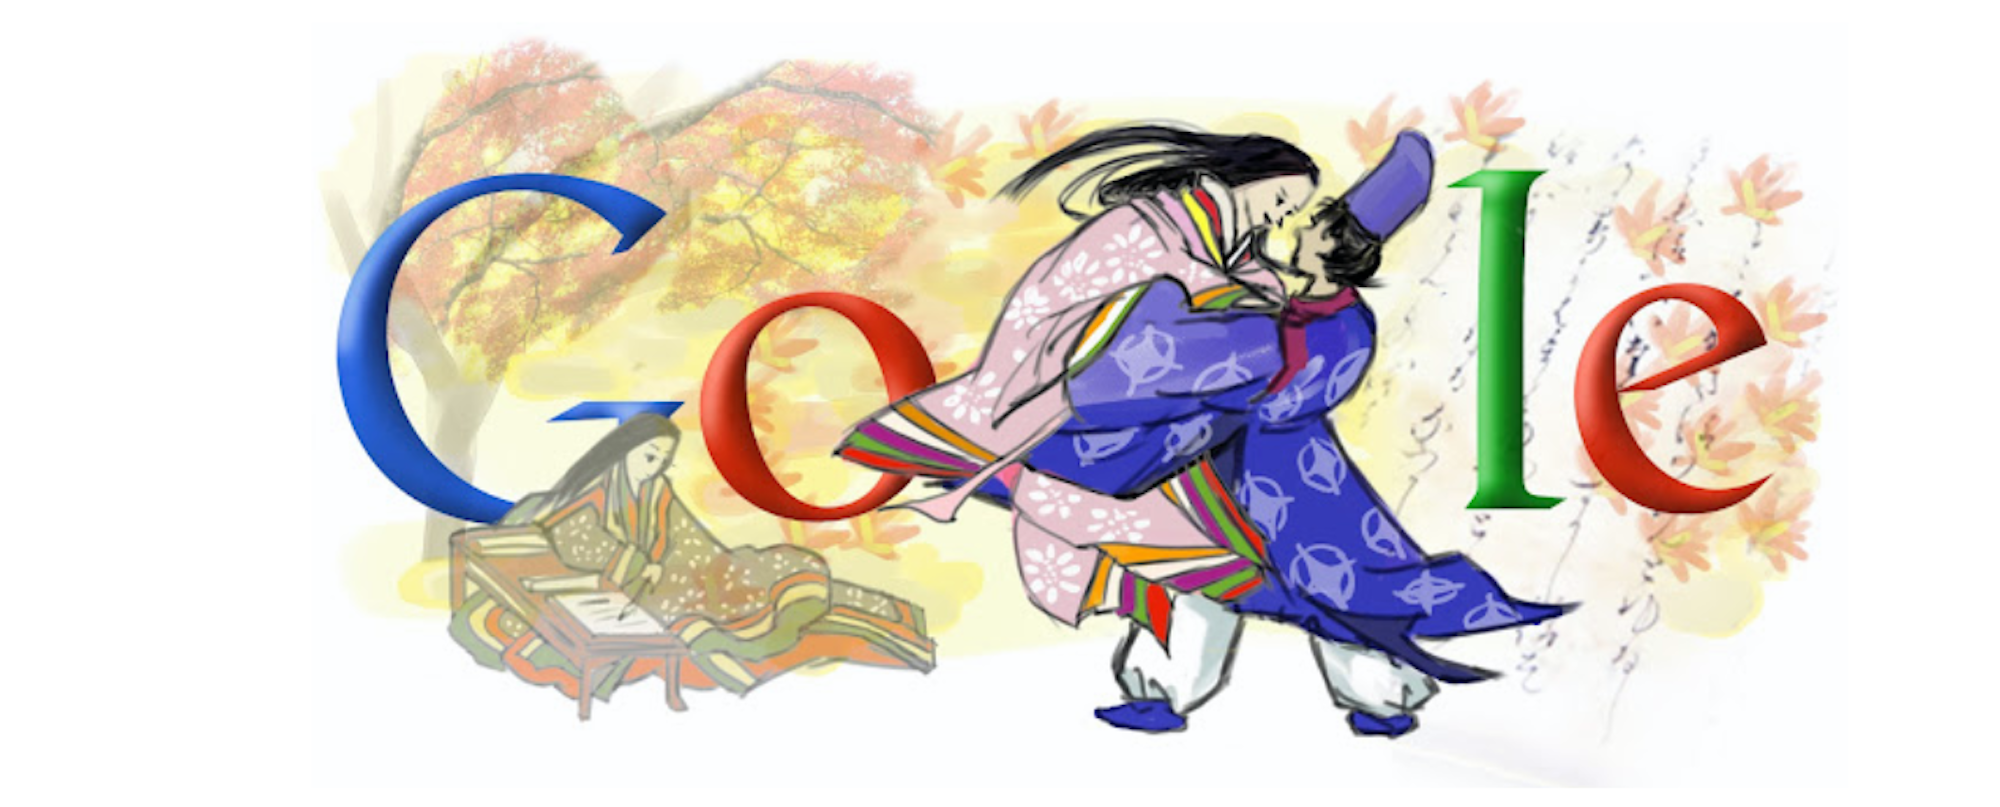 A captivating Doodle by Google about the novel The Tale of Genji